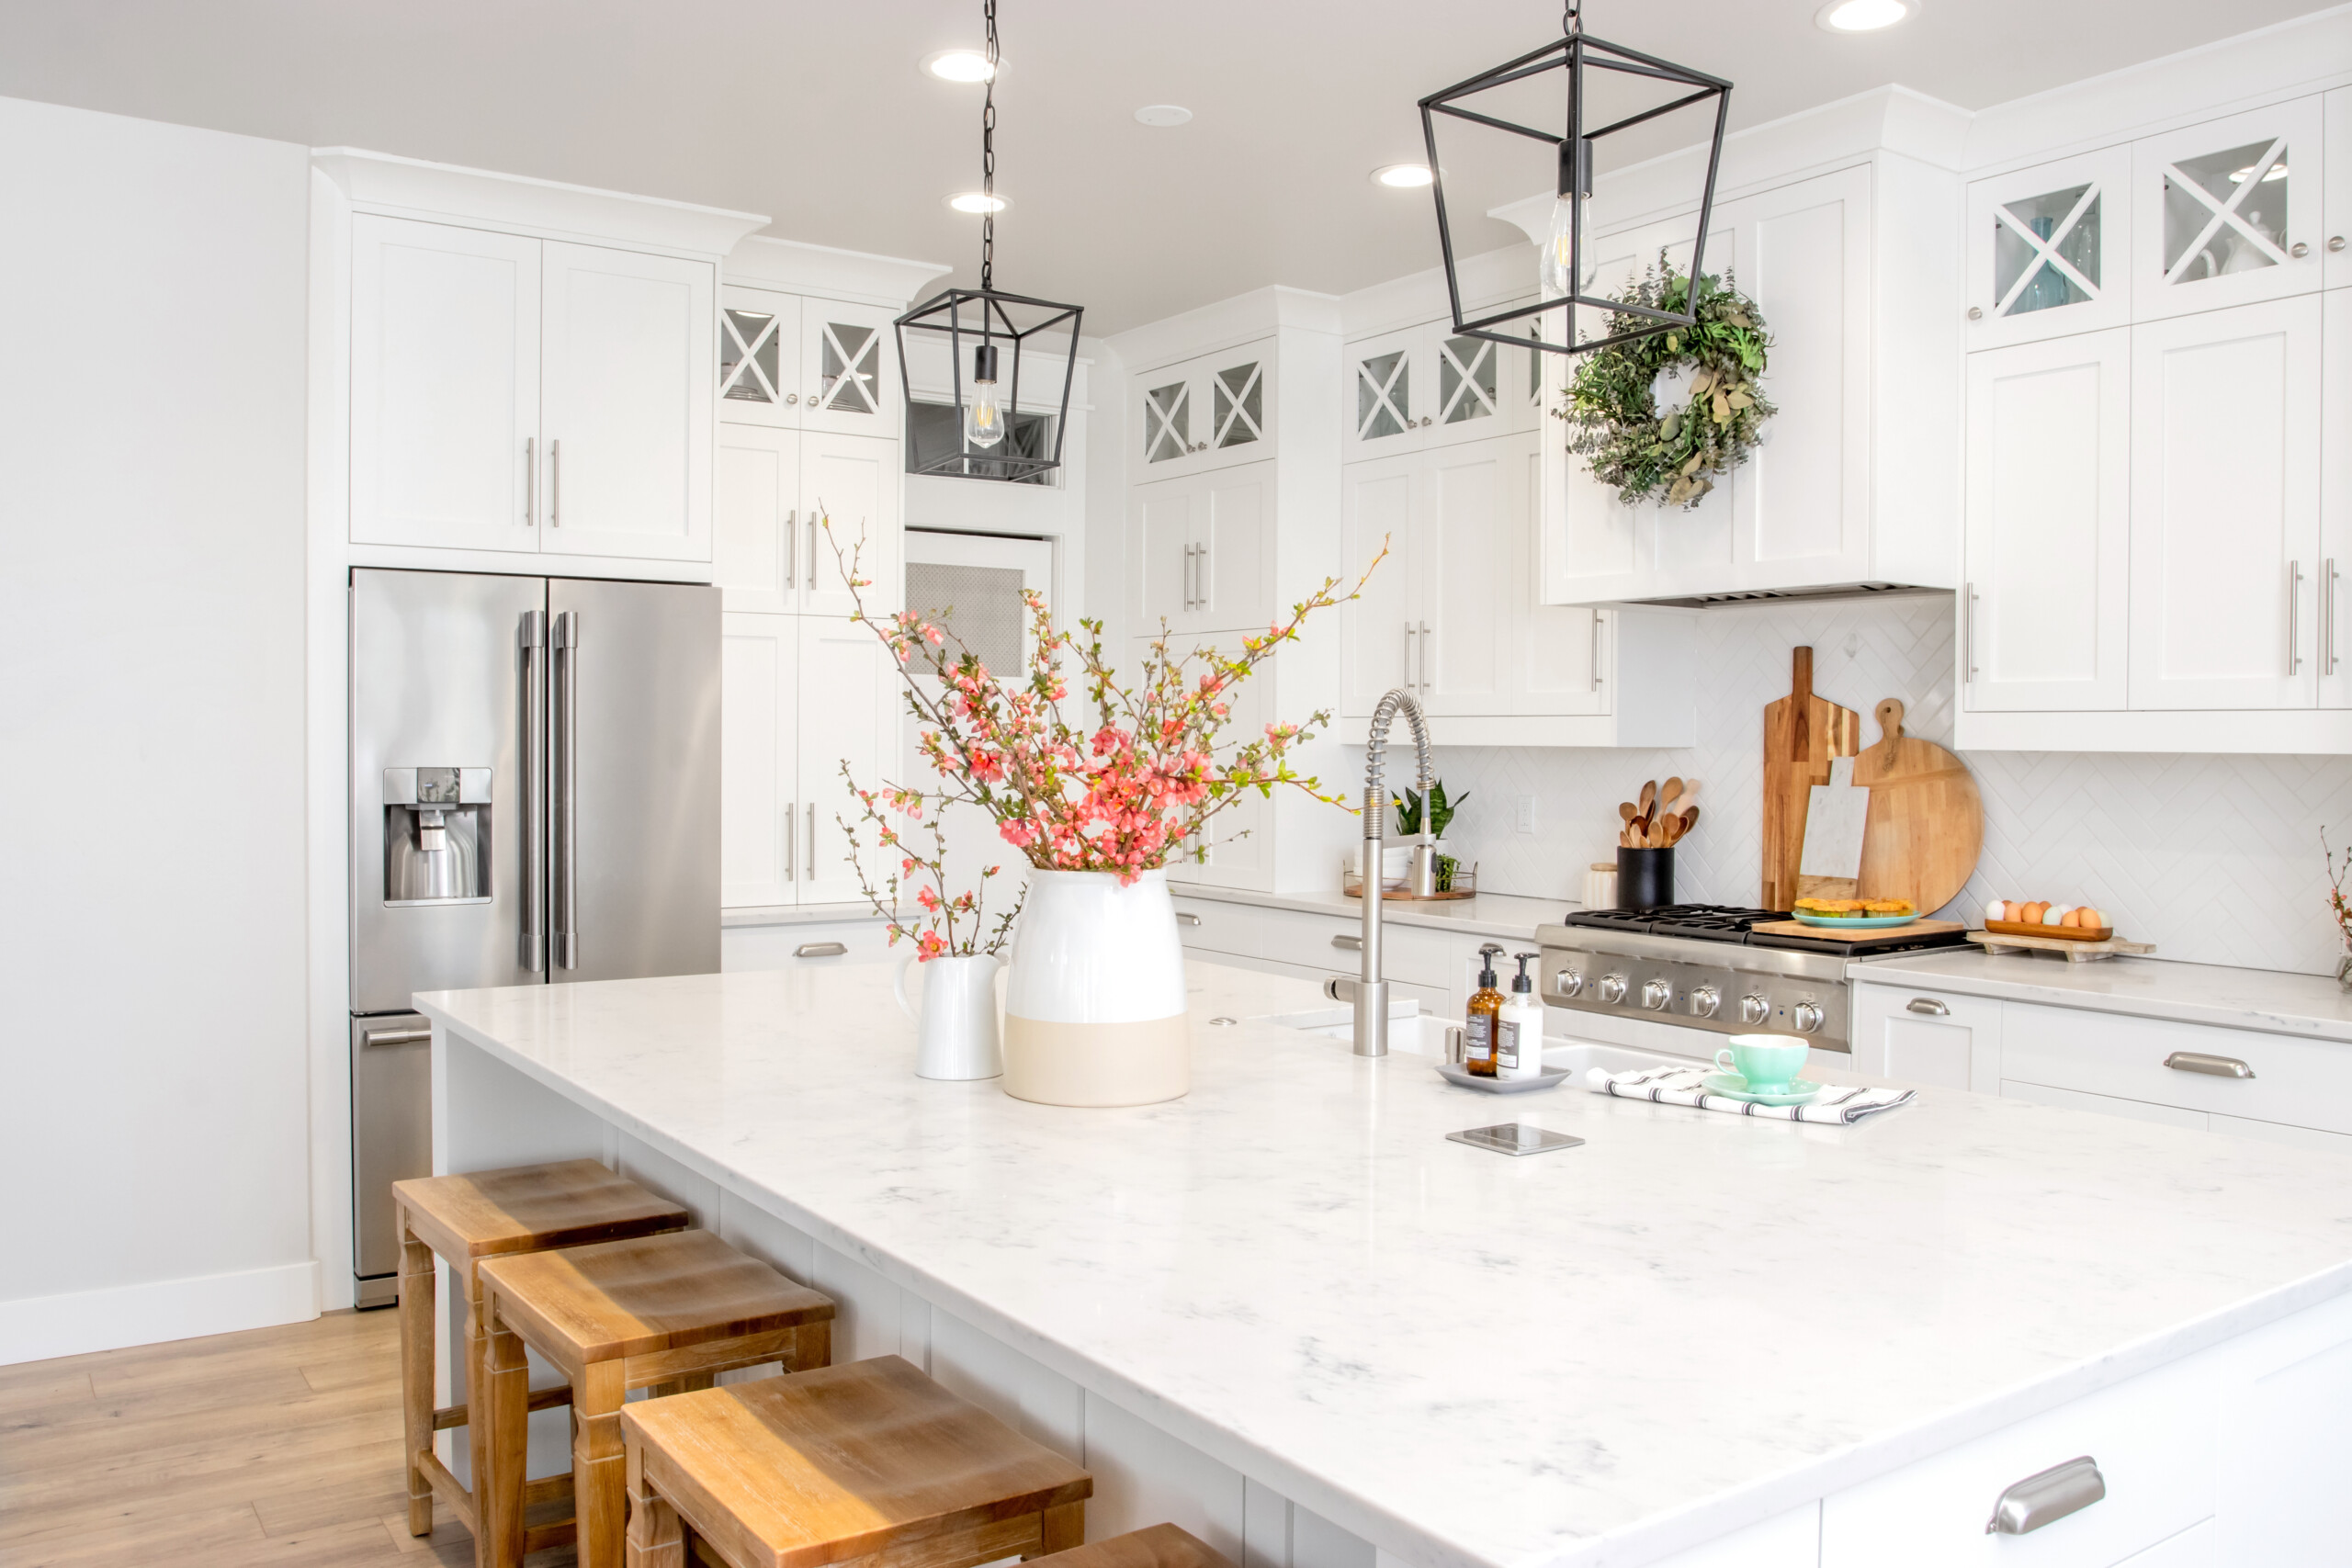 Kitchen Renovation Trends   Get Inspired By The Top 20   Décor Aid